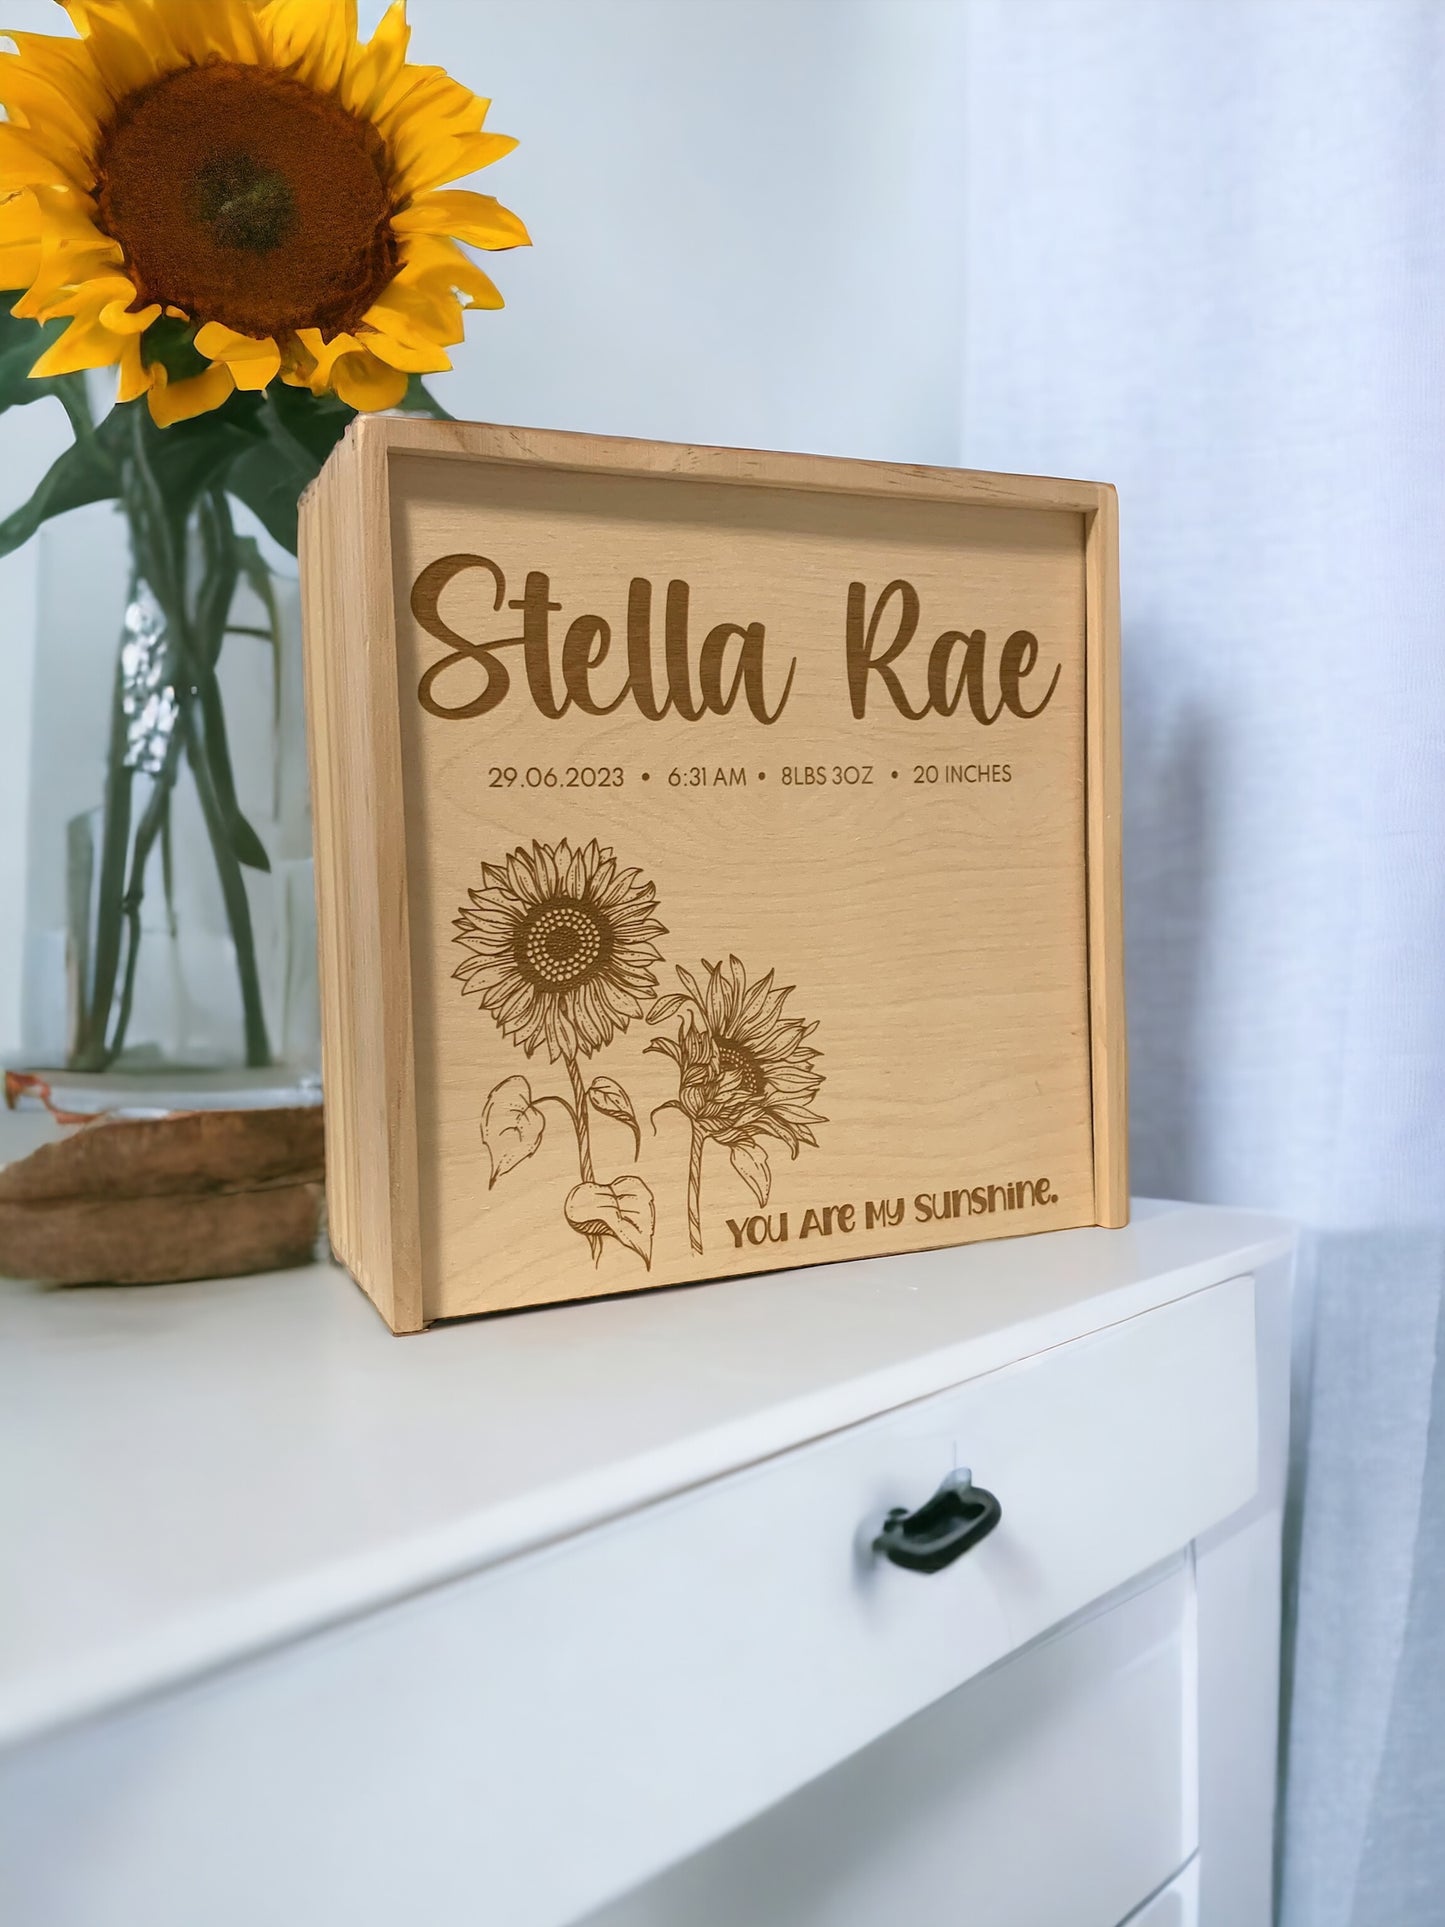 Personalized Memory Keepsake Box, Baby Girl Shower Gift, You are my Sunshine, Custom Newborn Woodland Floral Baby Gift, Unique New Baby Gift